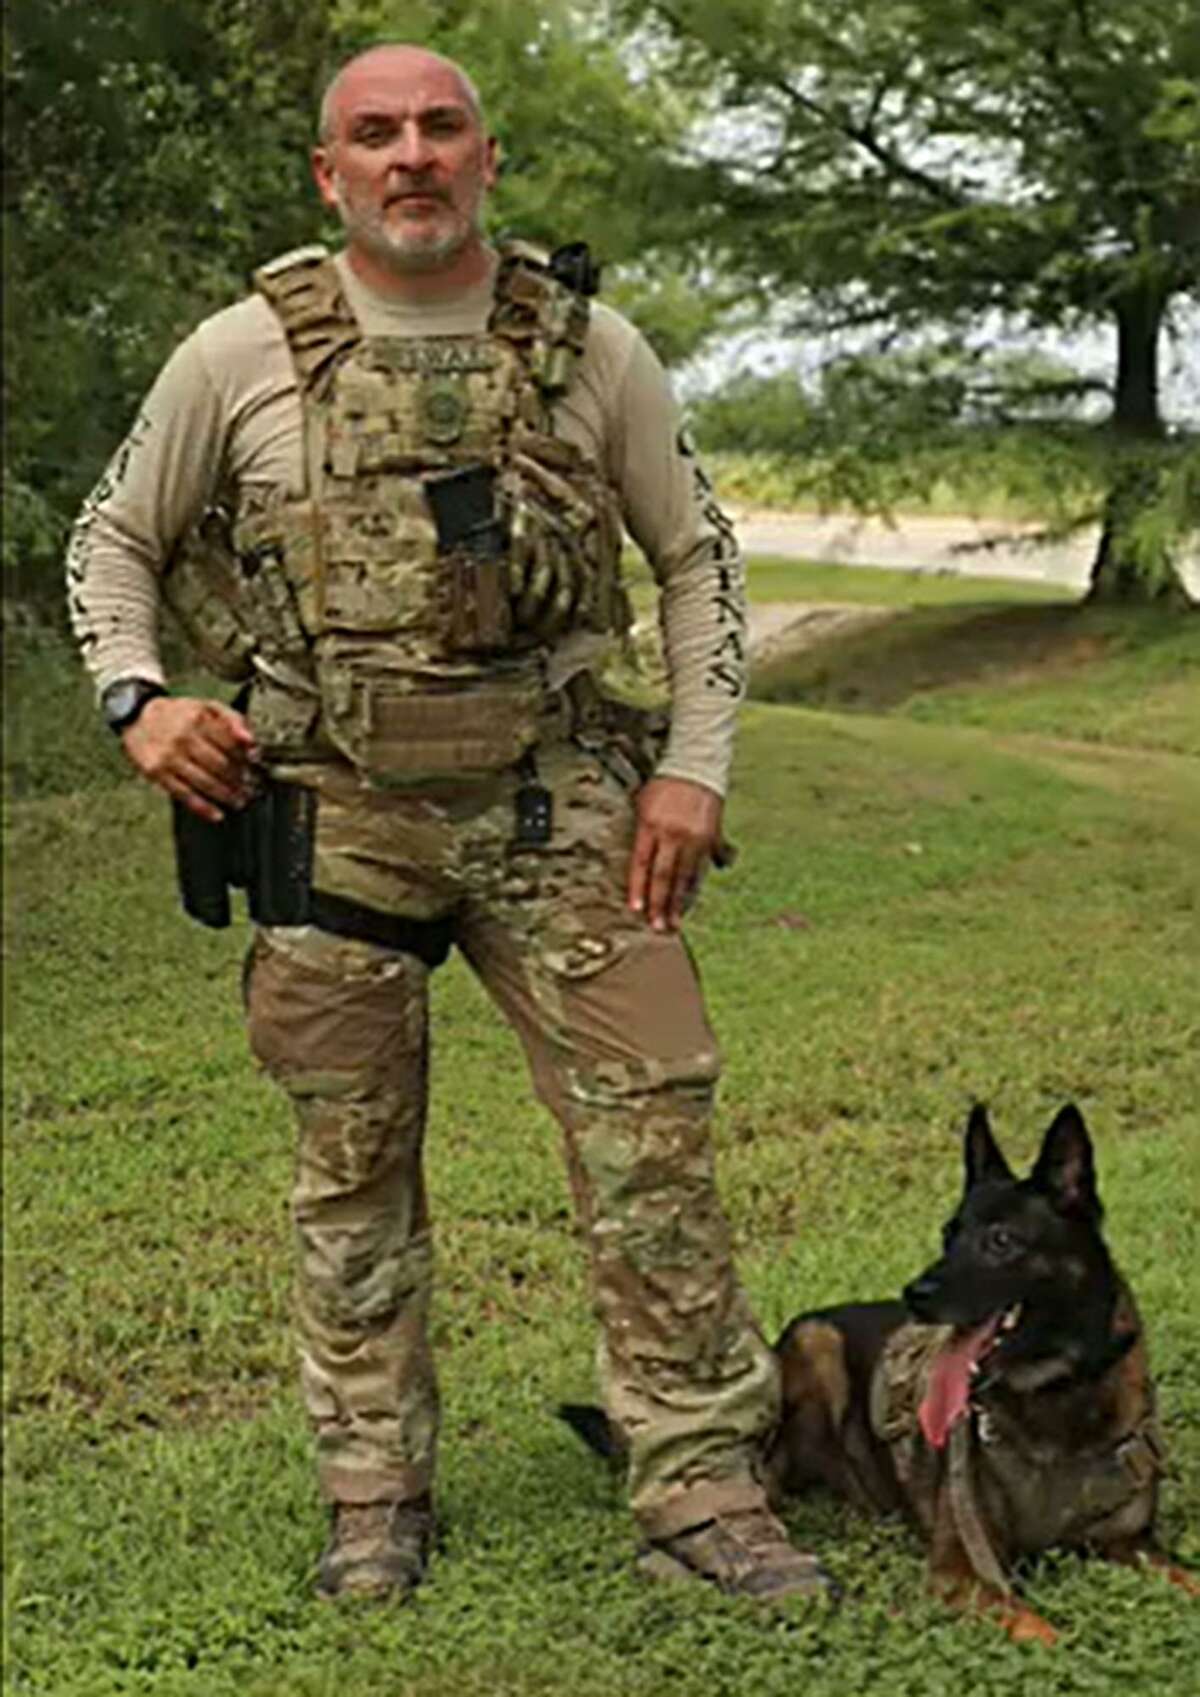 Deputy Floyd Cardenas, 41, who was assigned to the SWAT K-9 unit, was found unresponsive by his family Thursday morning, Sheriff Javier Salazar says.